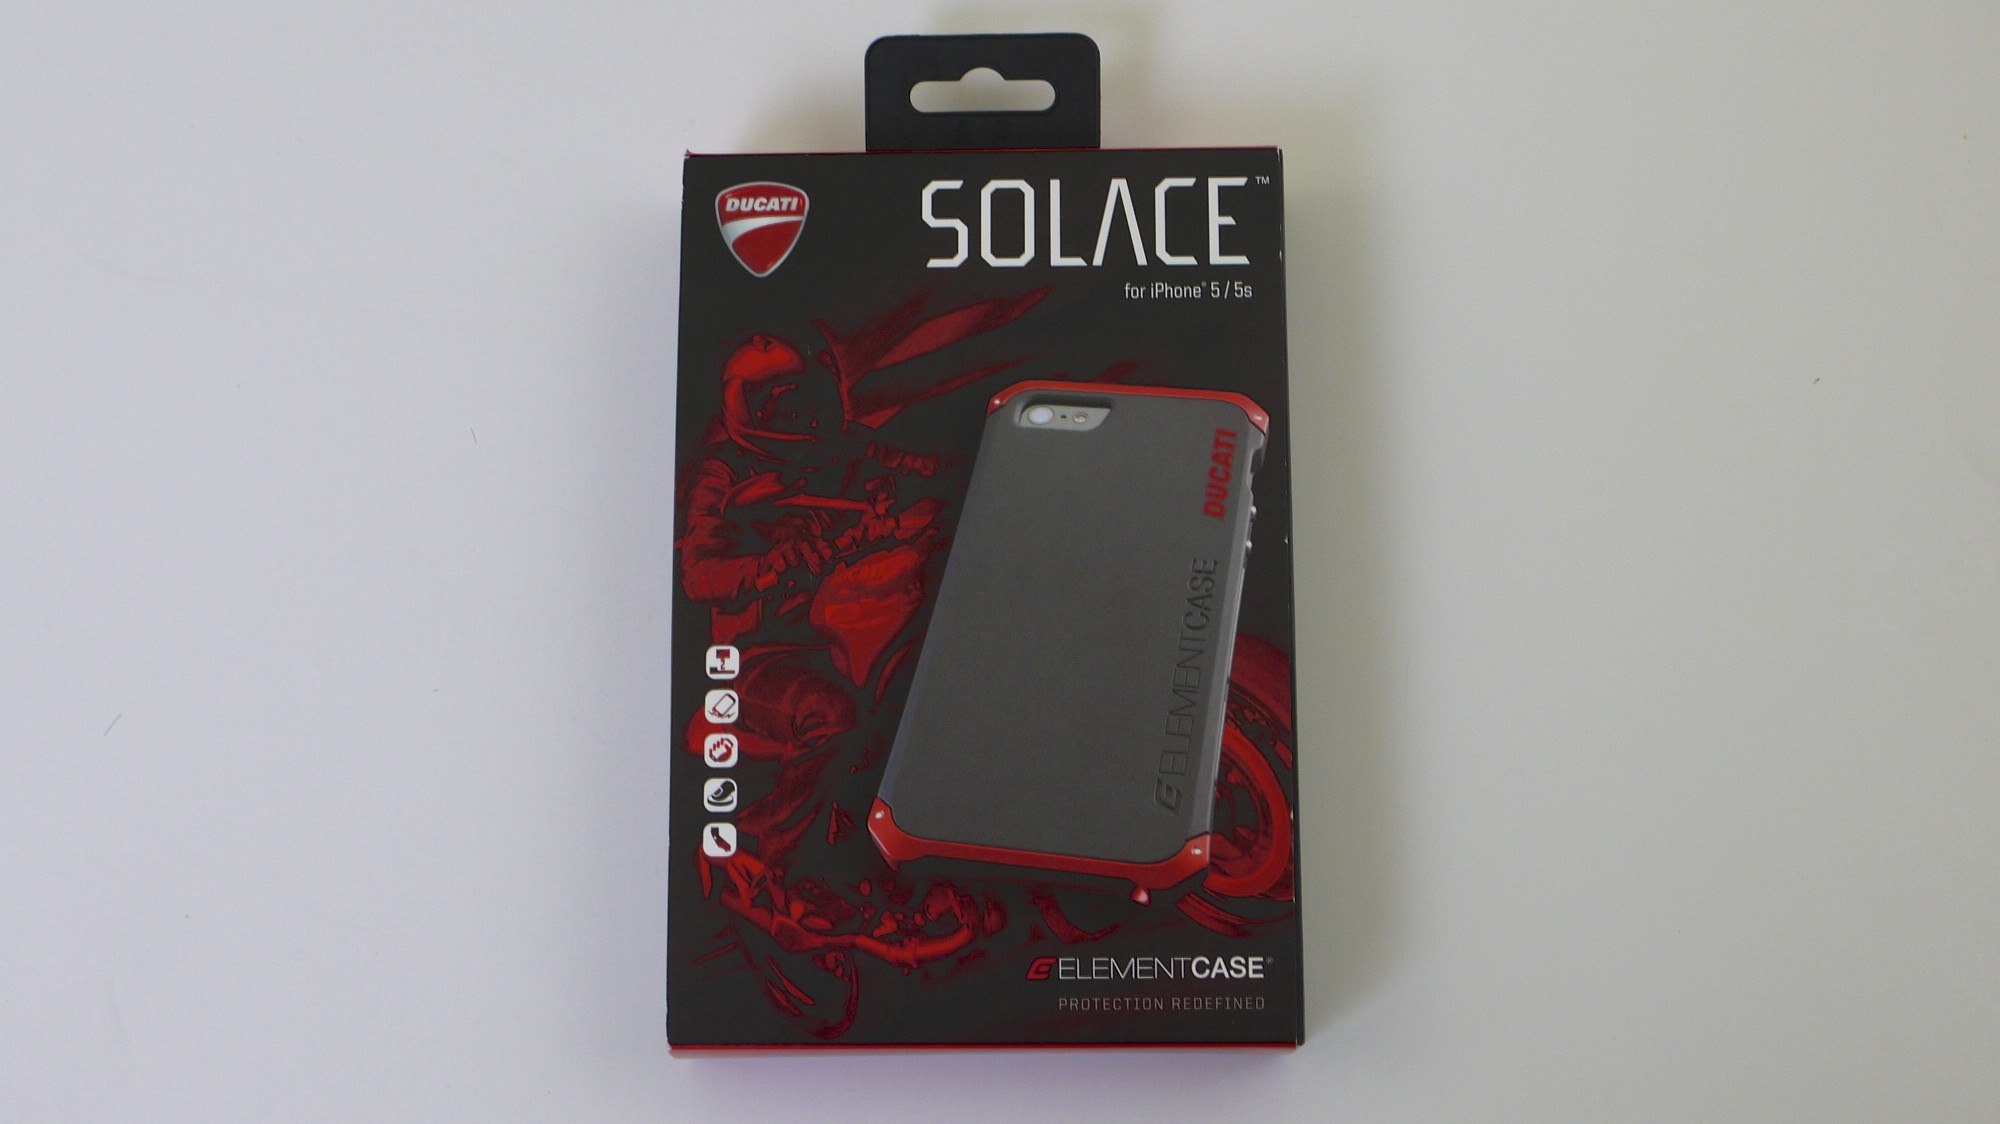 Solace Ducati iPhone 5/5s Case Review